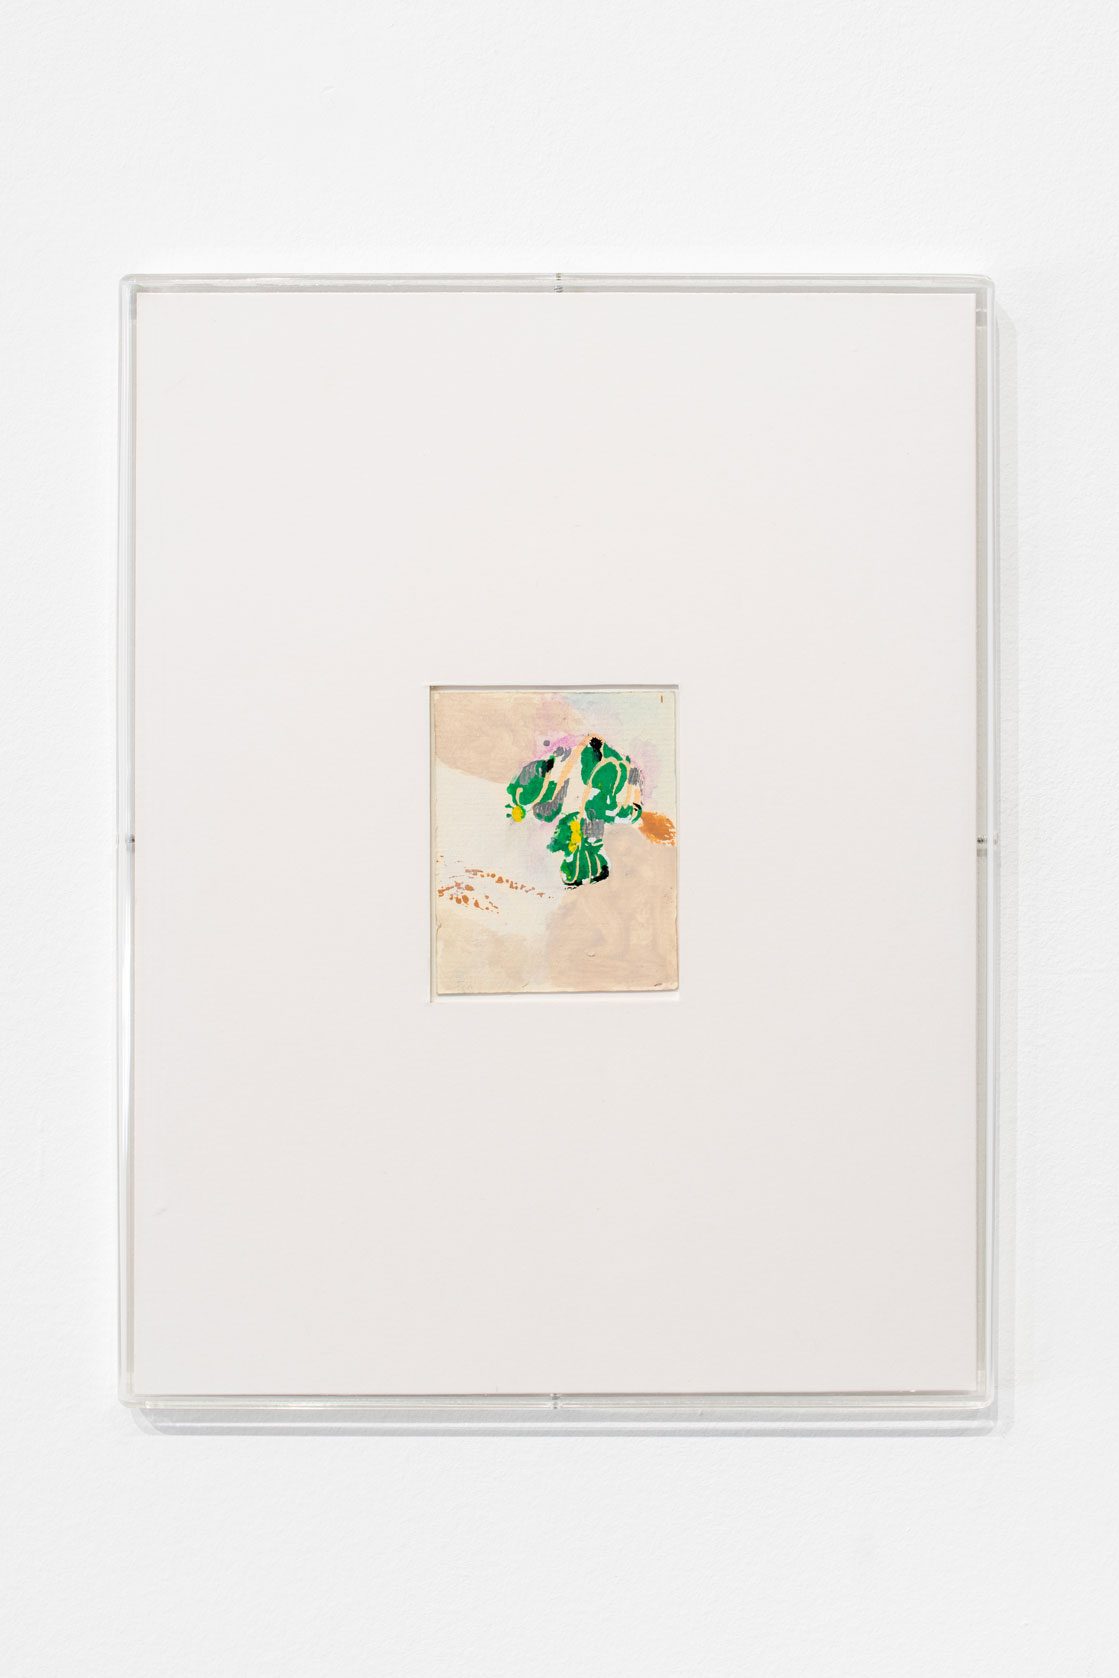 Julien Carreyn Untitled (Paris), 2021 acrylic and watercolor on cardboard, perspex artist frame, 7,5 × 6 cm (framed: 28 × 22,5 cm) Courtesy of the artist and Crèvecoeur. Photography: Martin Argyroglo.